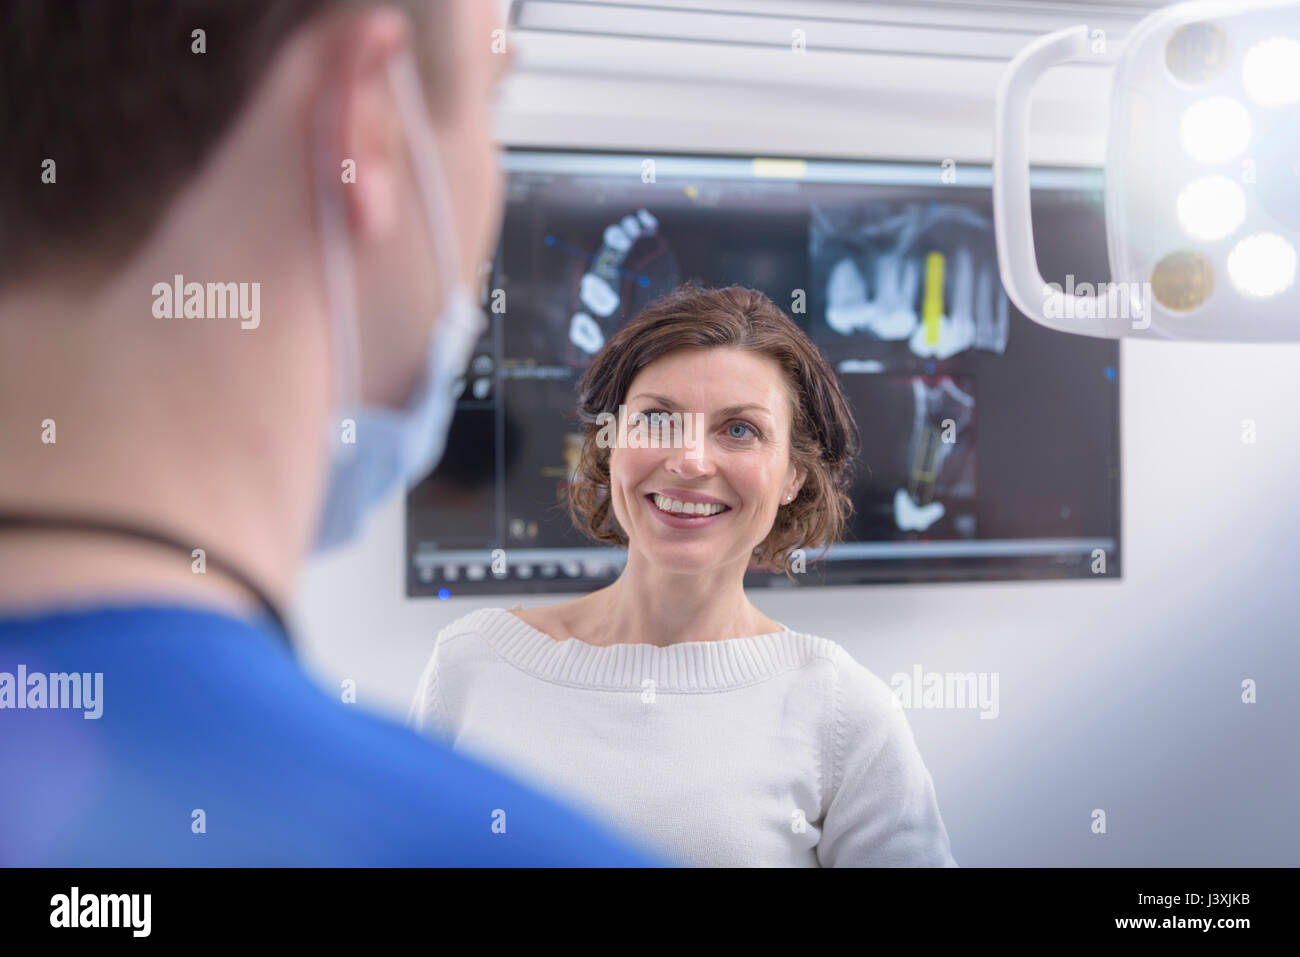 Dentist showing x-rays on screen to patient in dental surgery Stock Photo